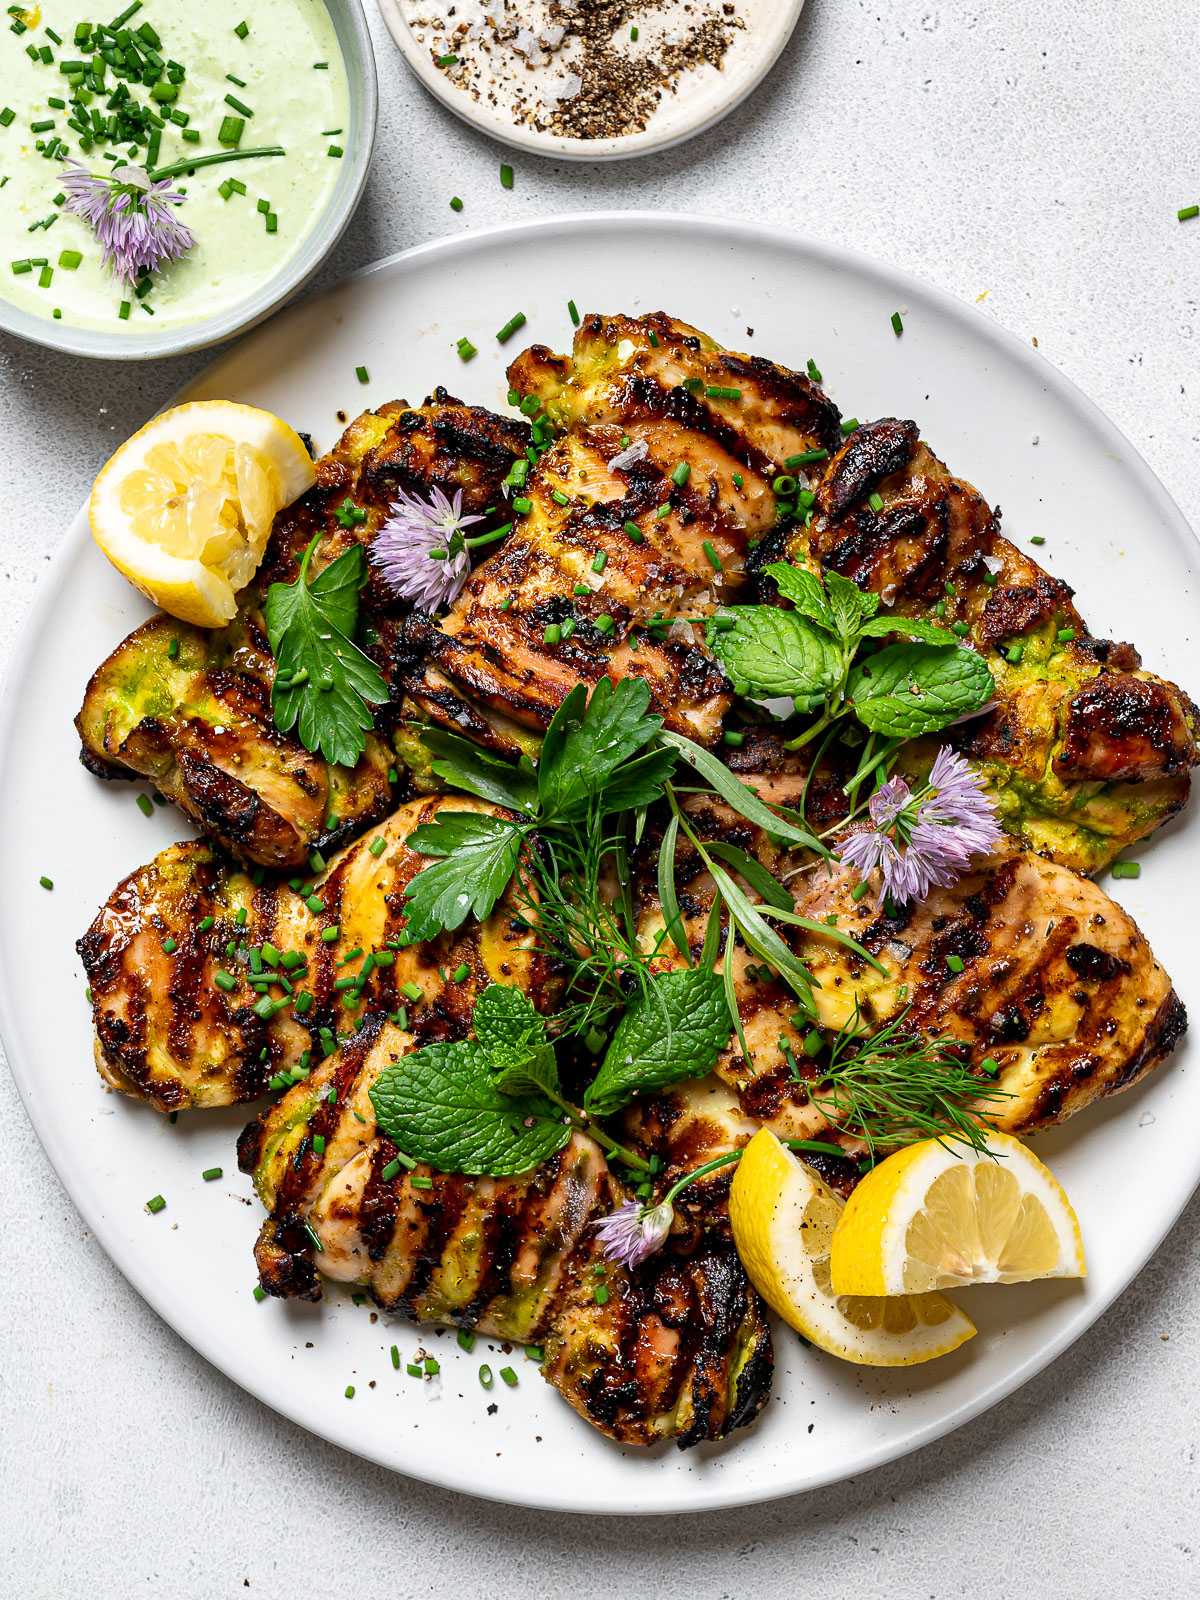 Grilled yogurt-marinated chicken on platter, garnished with herbs and lemon wedges and served with herby-yogurt sauce on the side